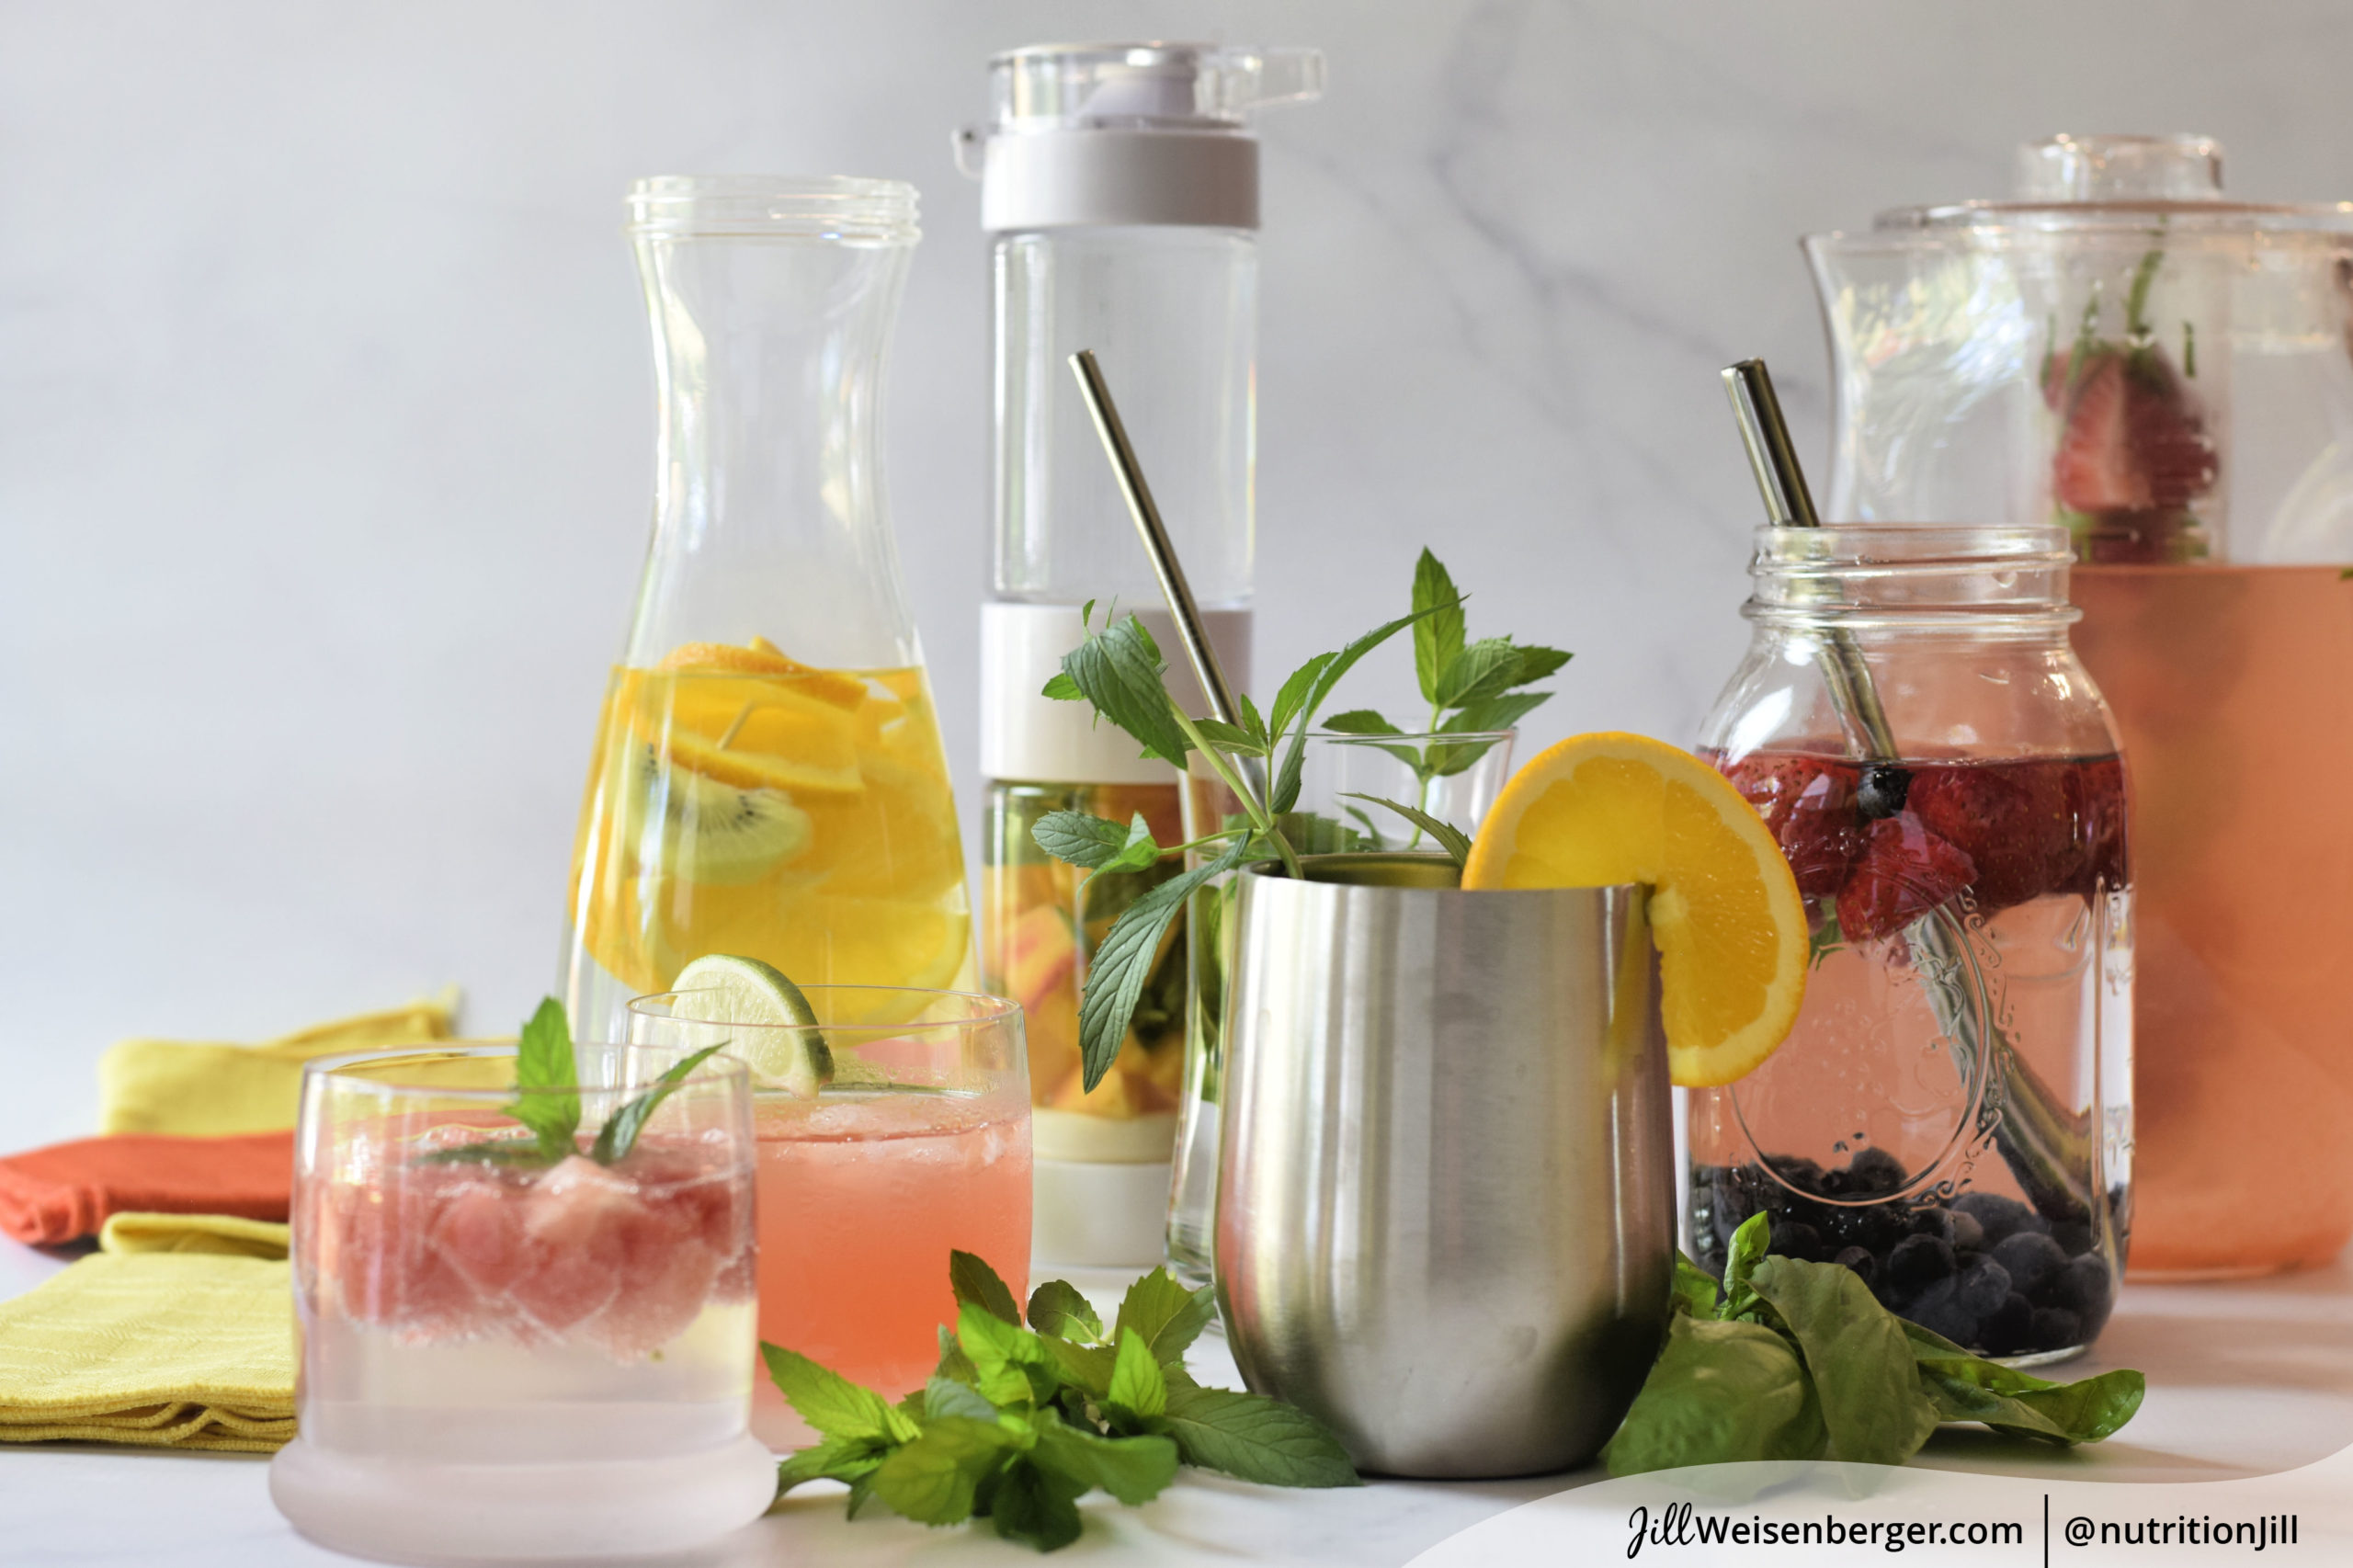 Glasses and pitchers with water, fruit and herbs to flavor water naturally